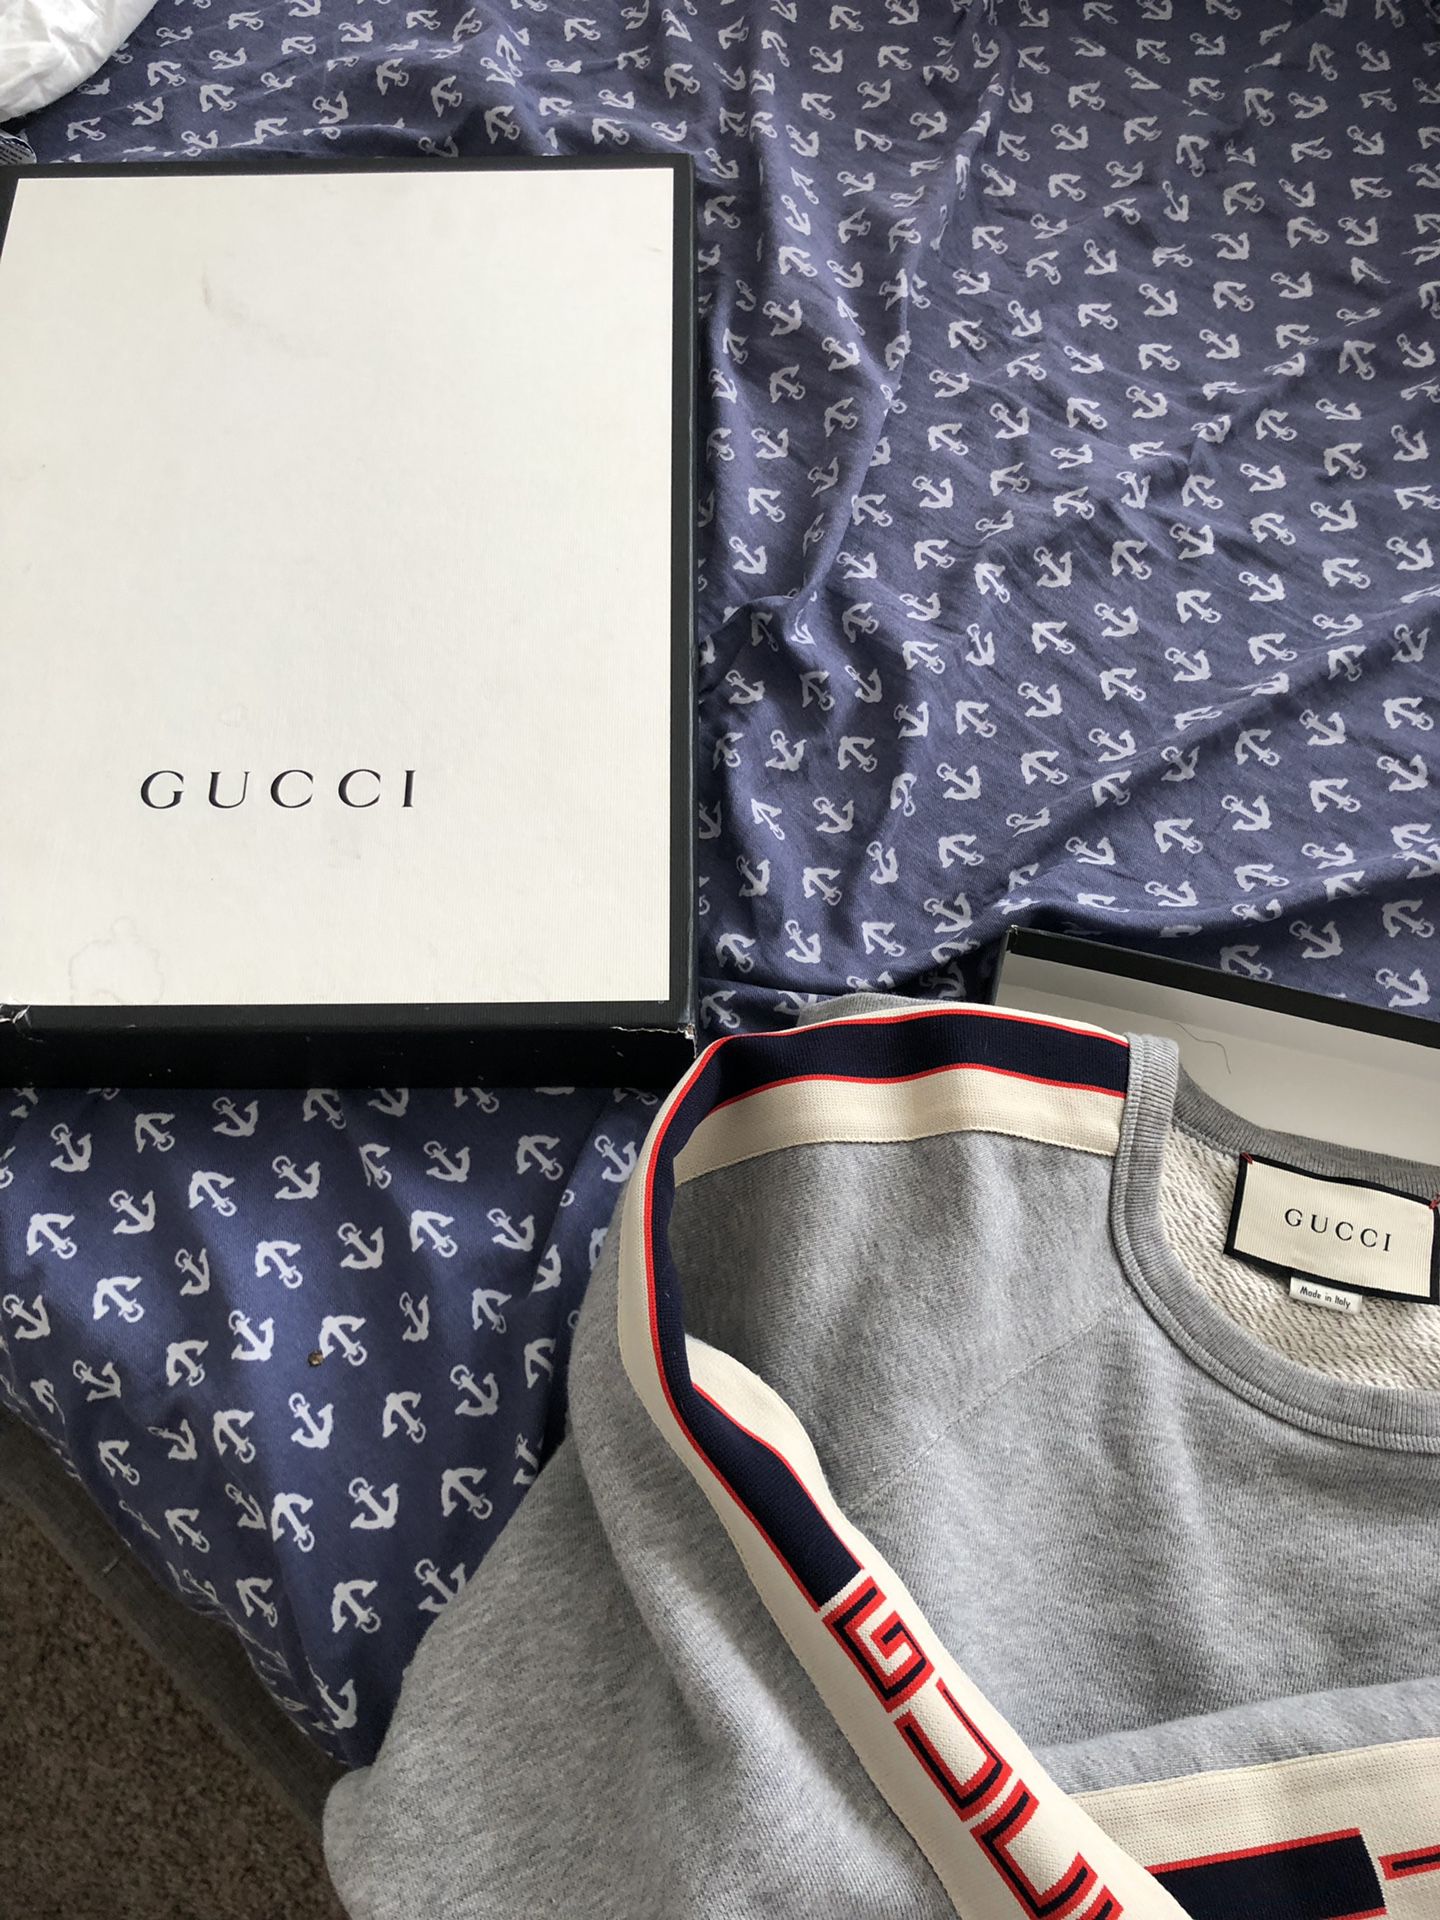 Gucci sweater with box and receipt